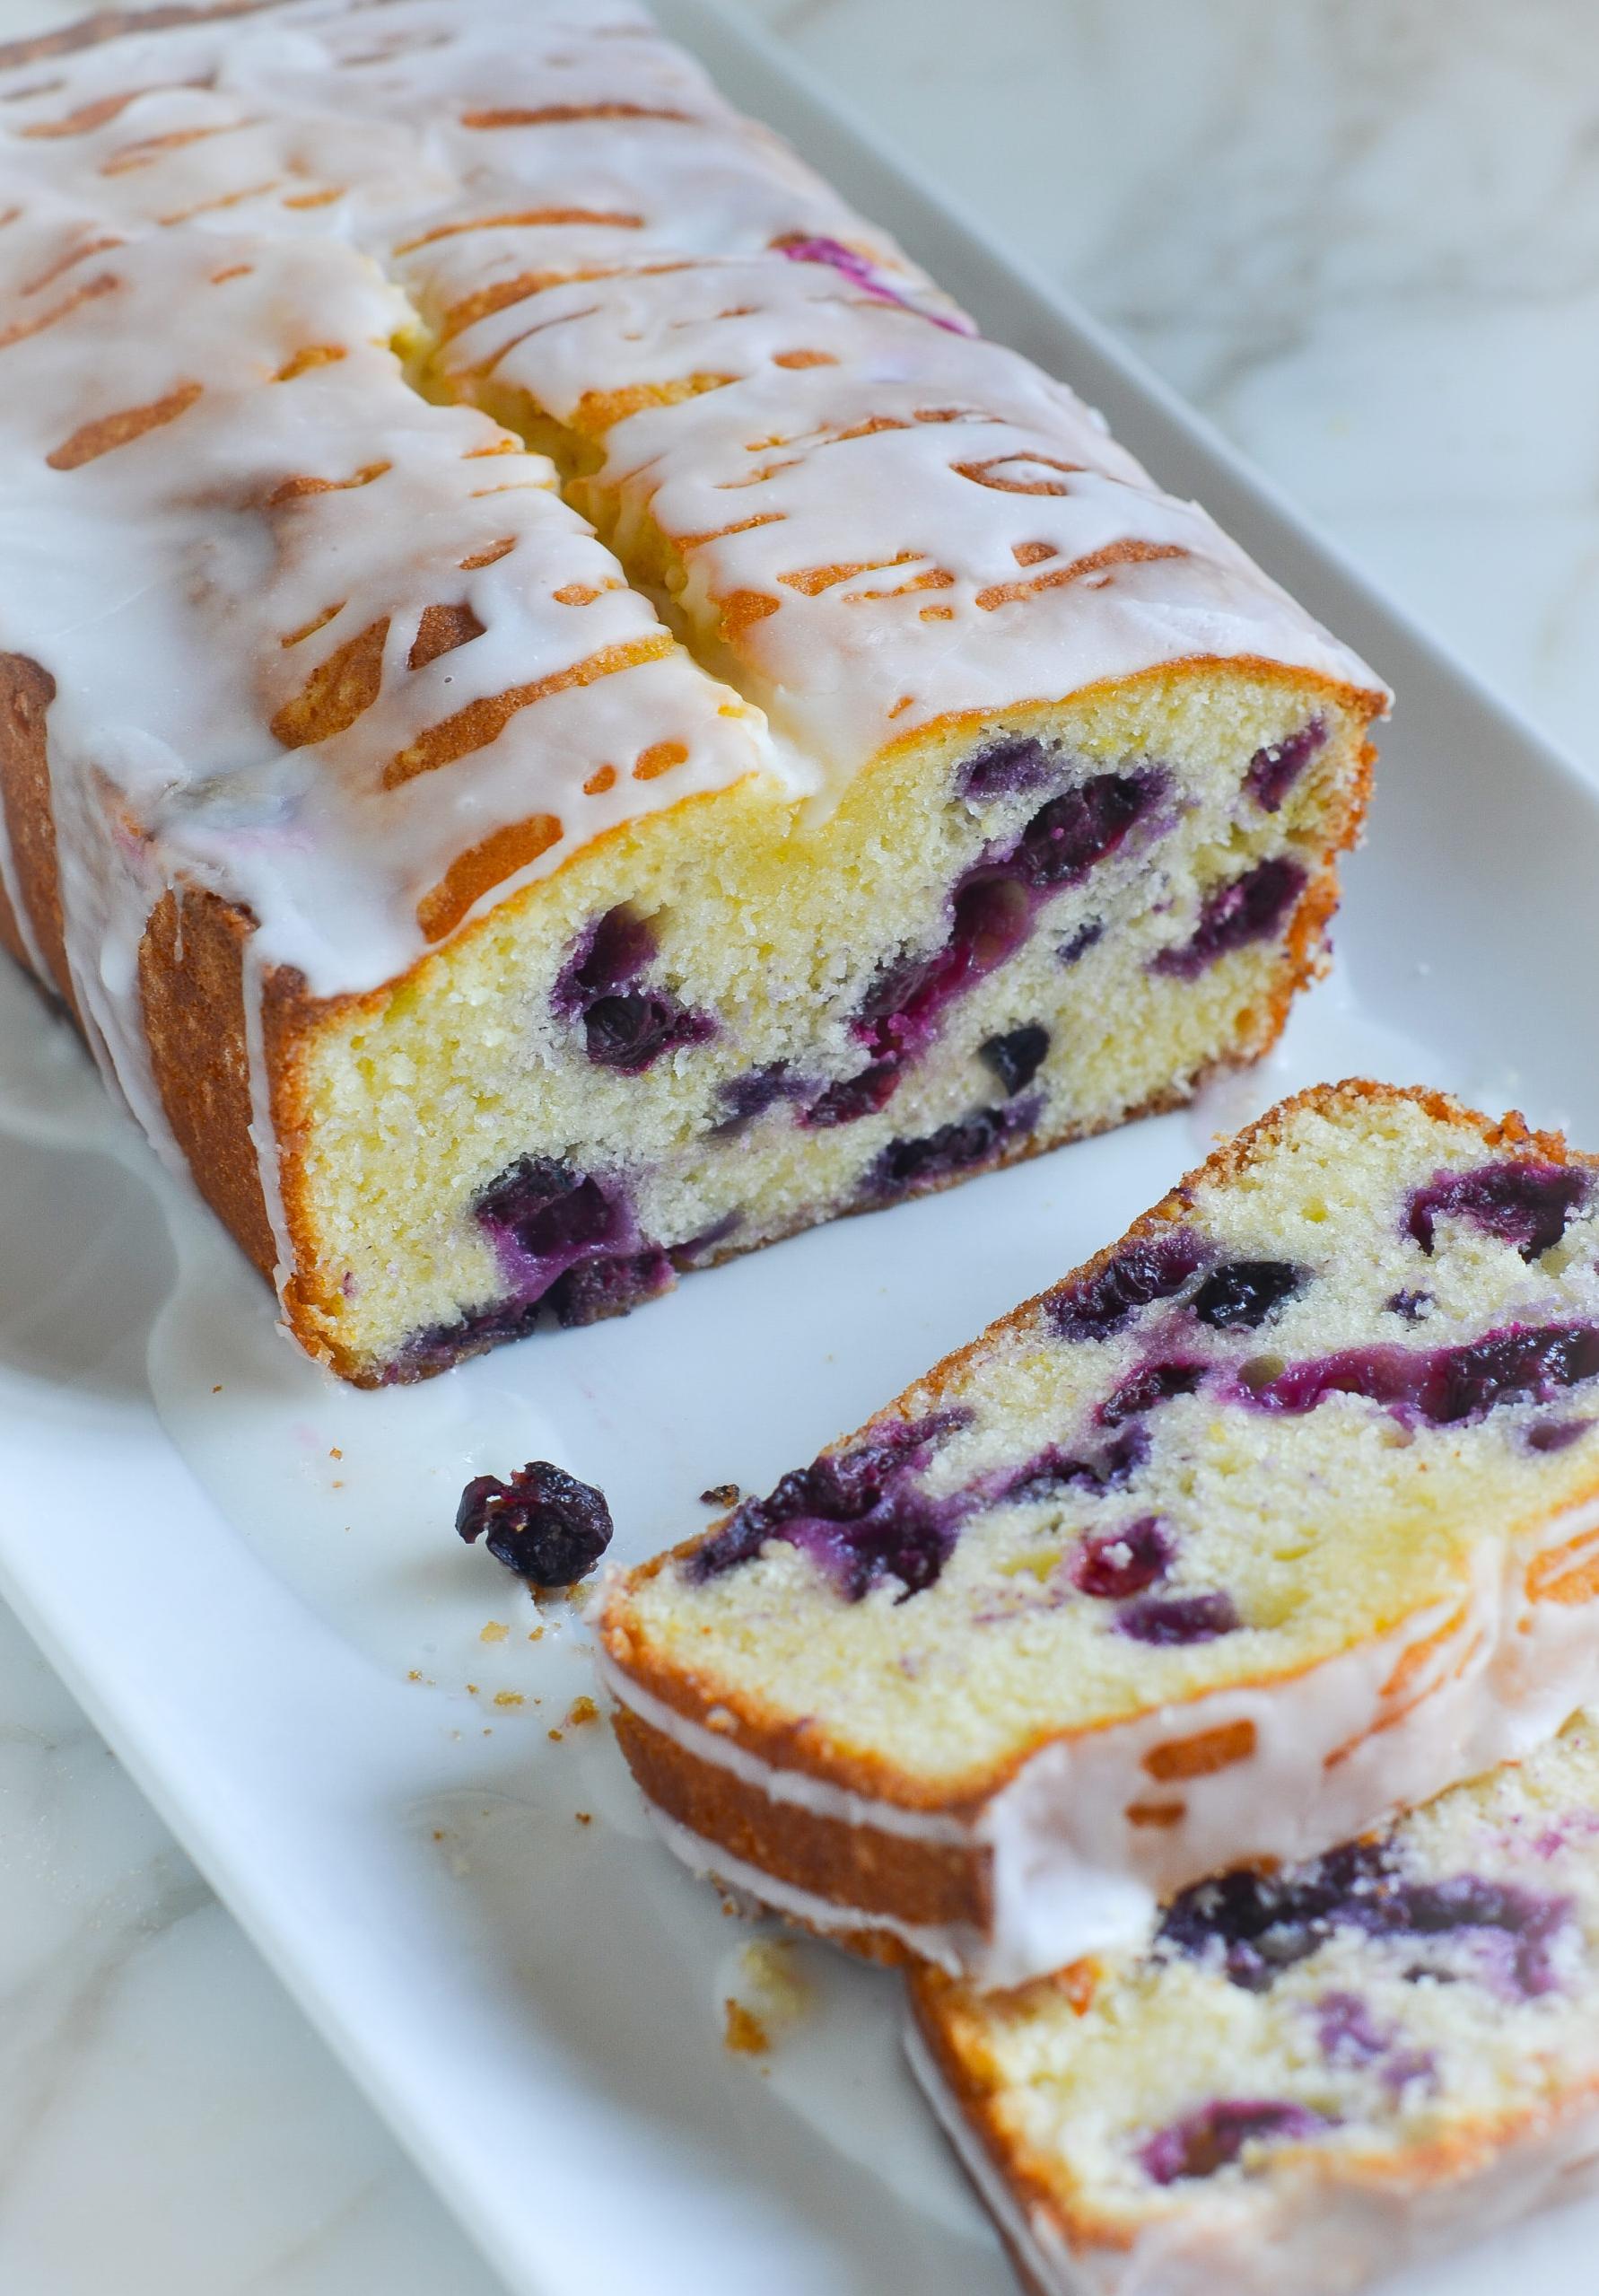 Delicious Blueberry Pound Cake Recipe – Try It Now!